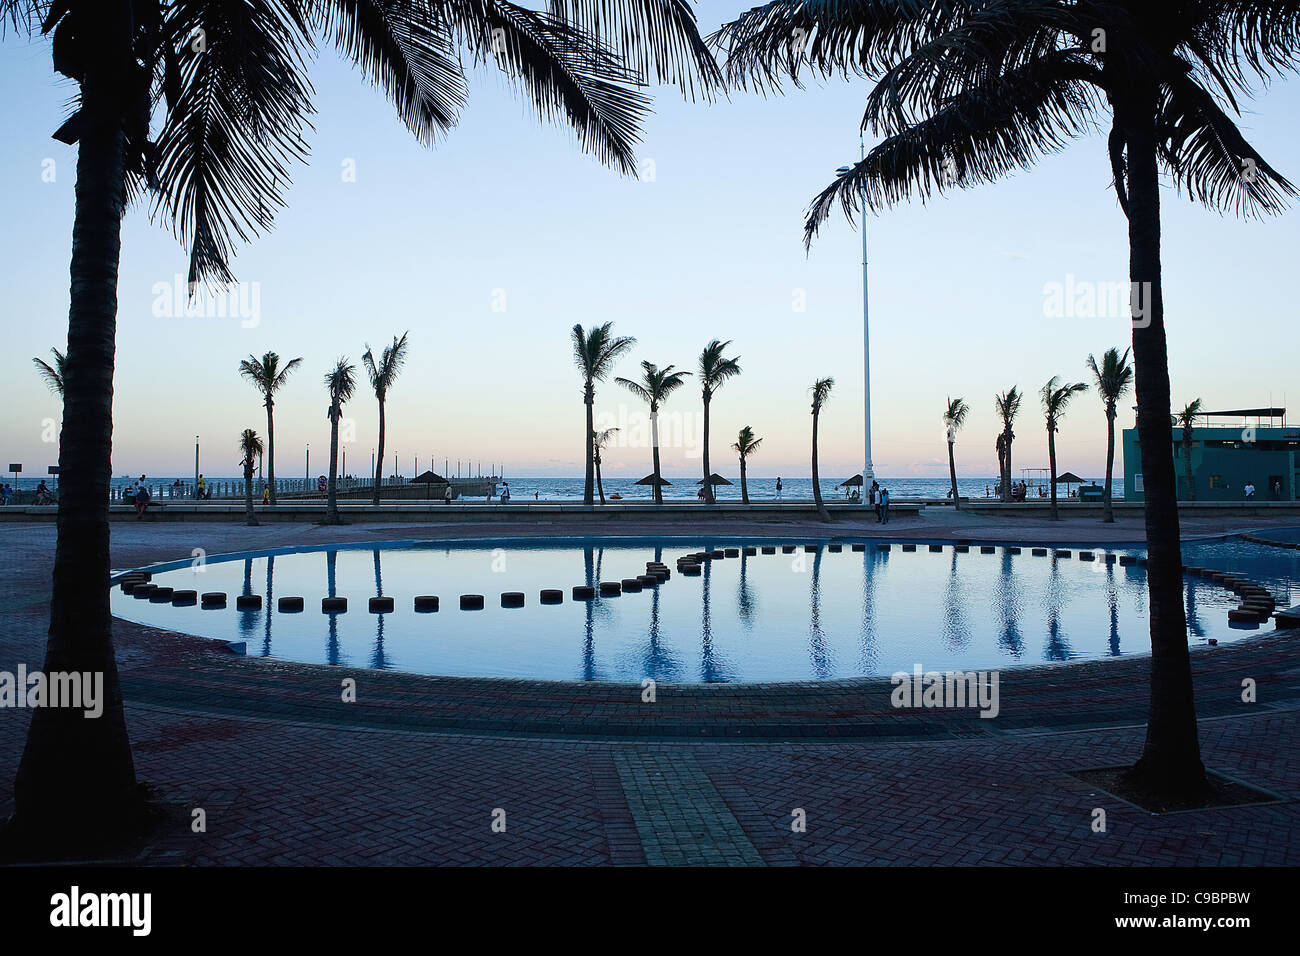 Swimming pools and palm trees on beachfront, Durban, KwaZulu-Natal Province, South Africa Stock Photo